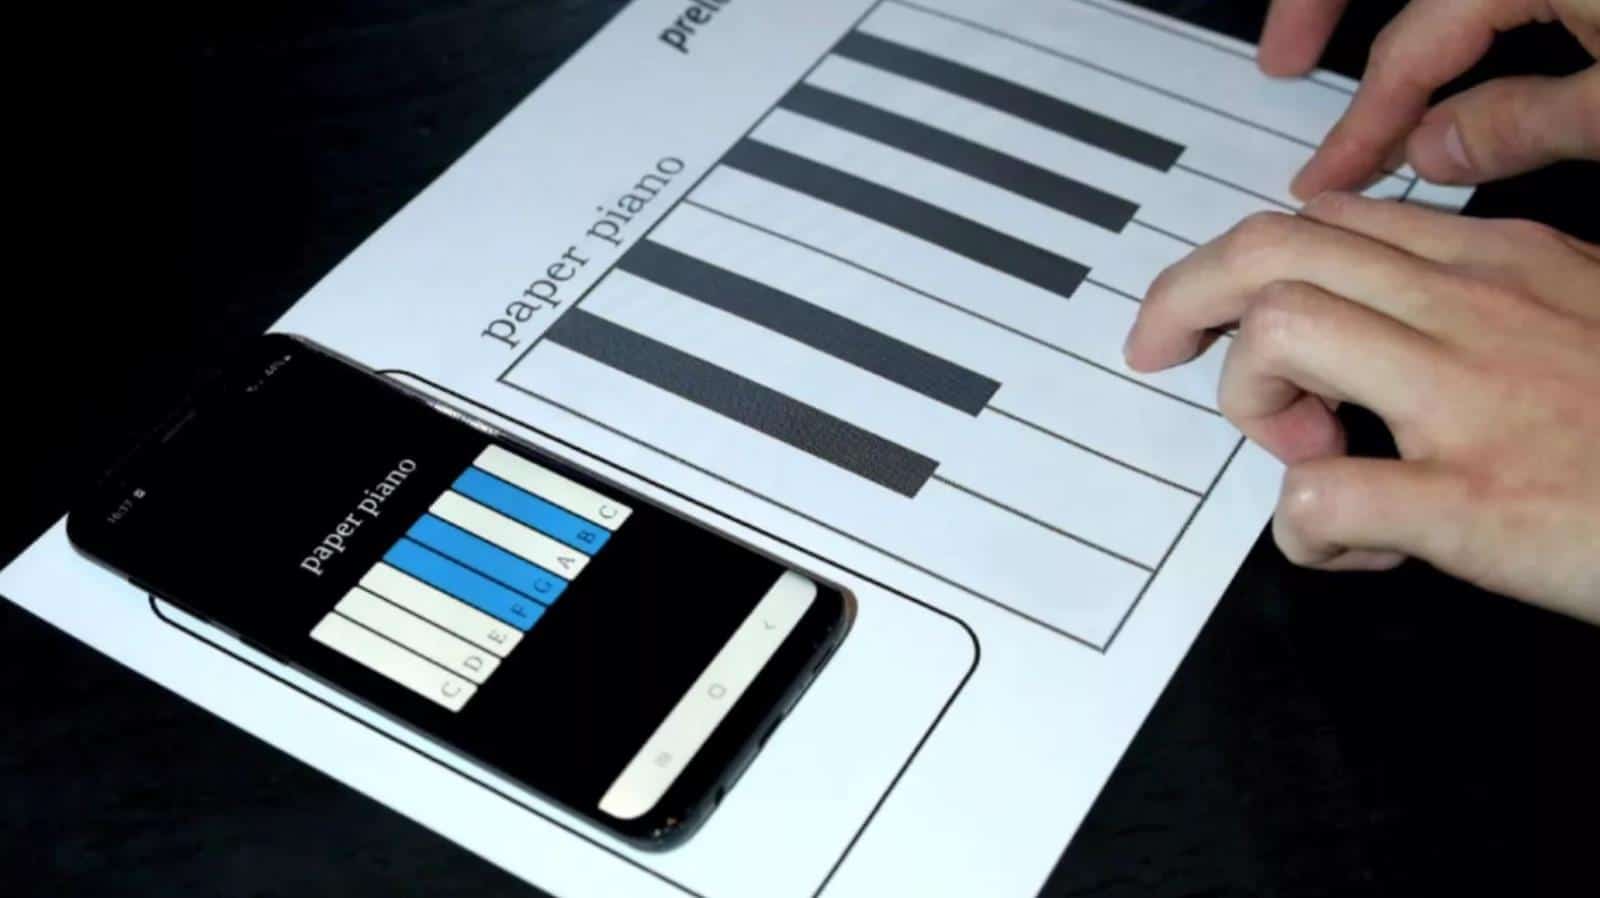 Piano paper, i.e. a demonstration of the potential of NFC and printed electronics